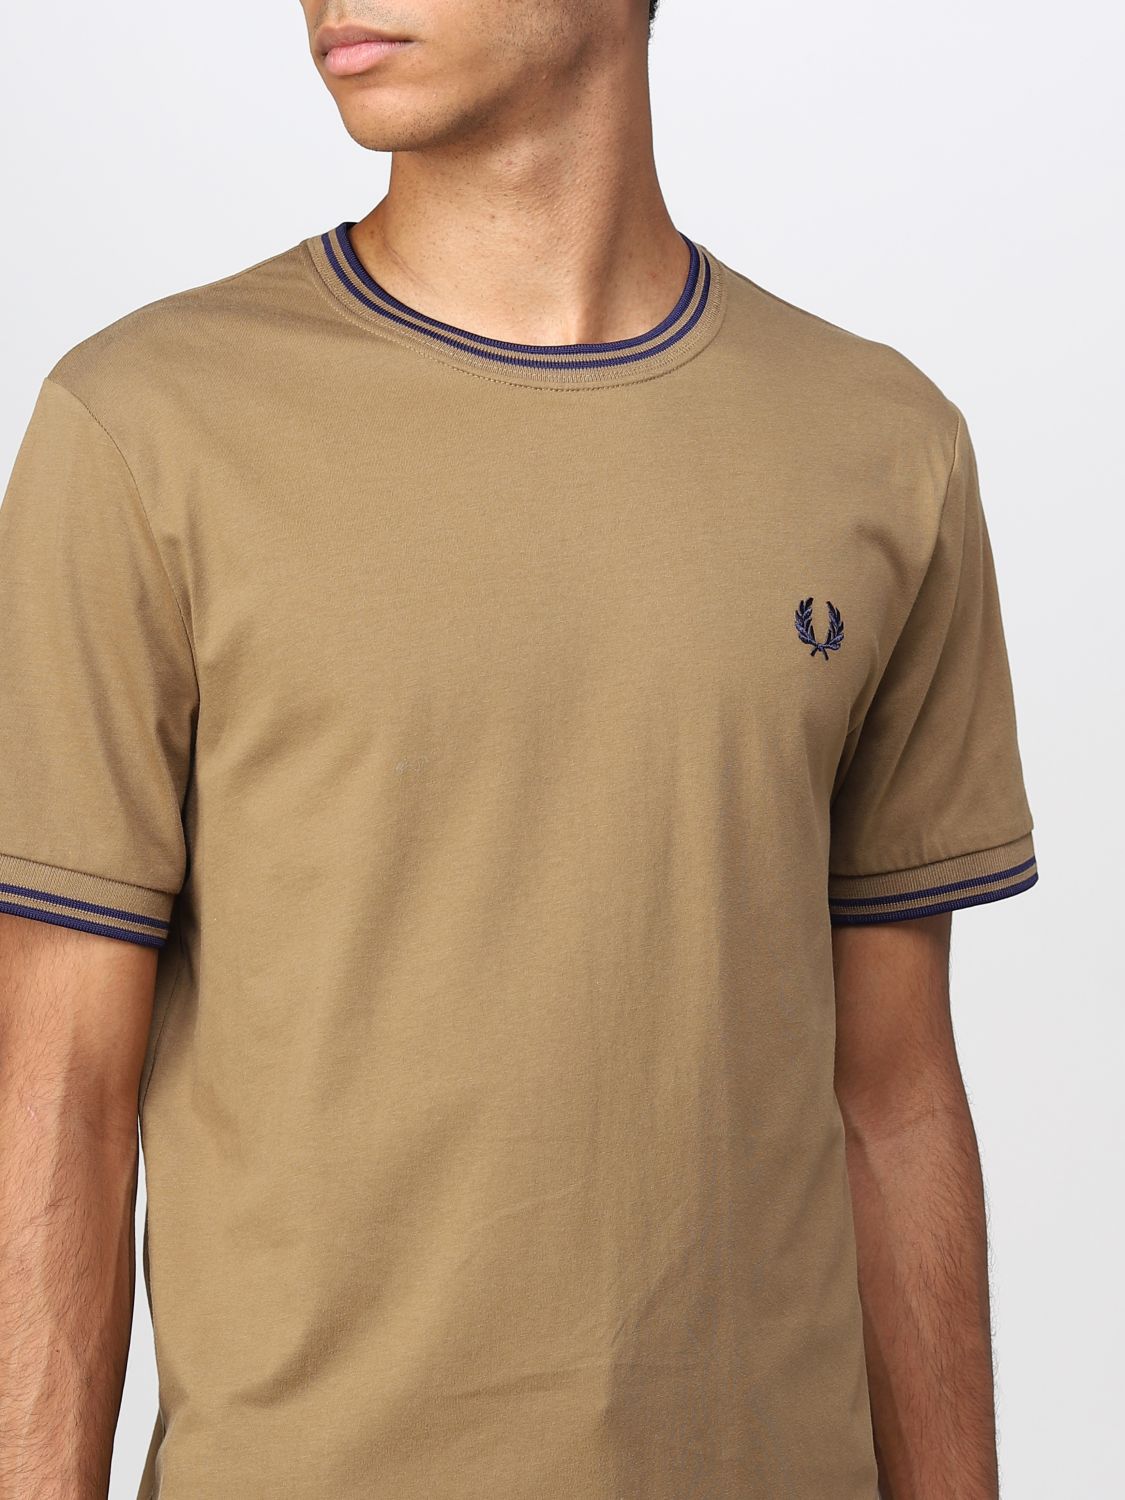 T-shirt Fred Perry: Fred Perry t-shirt for men brown 3